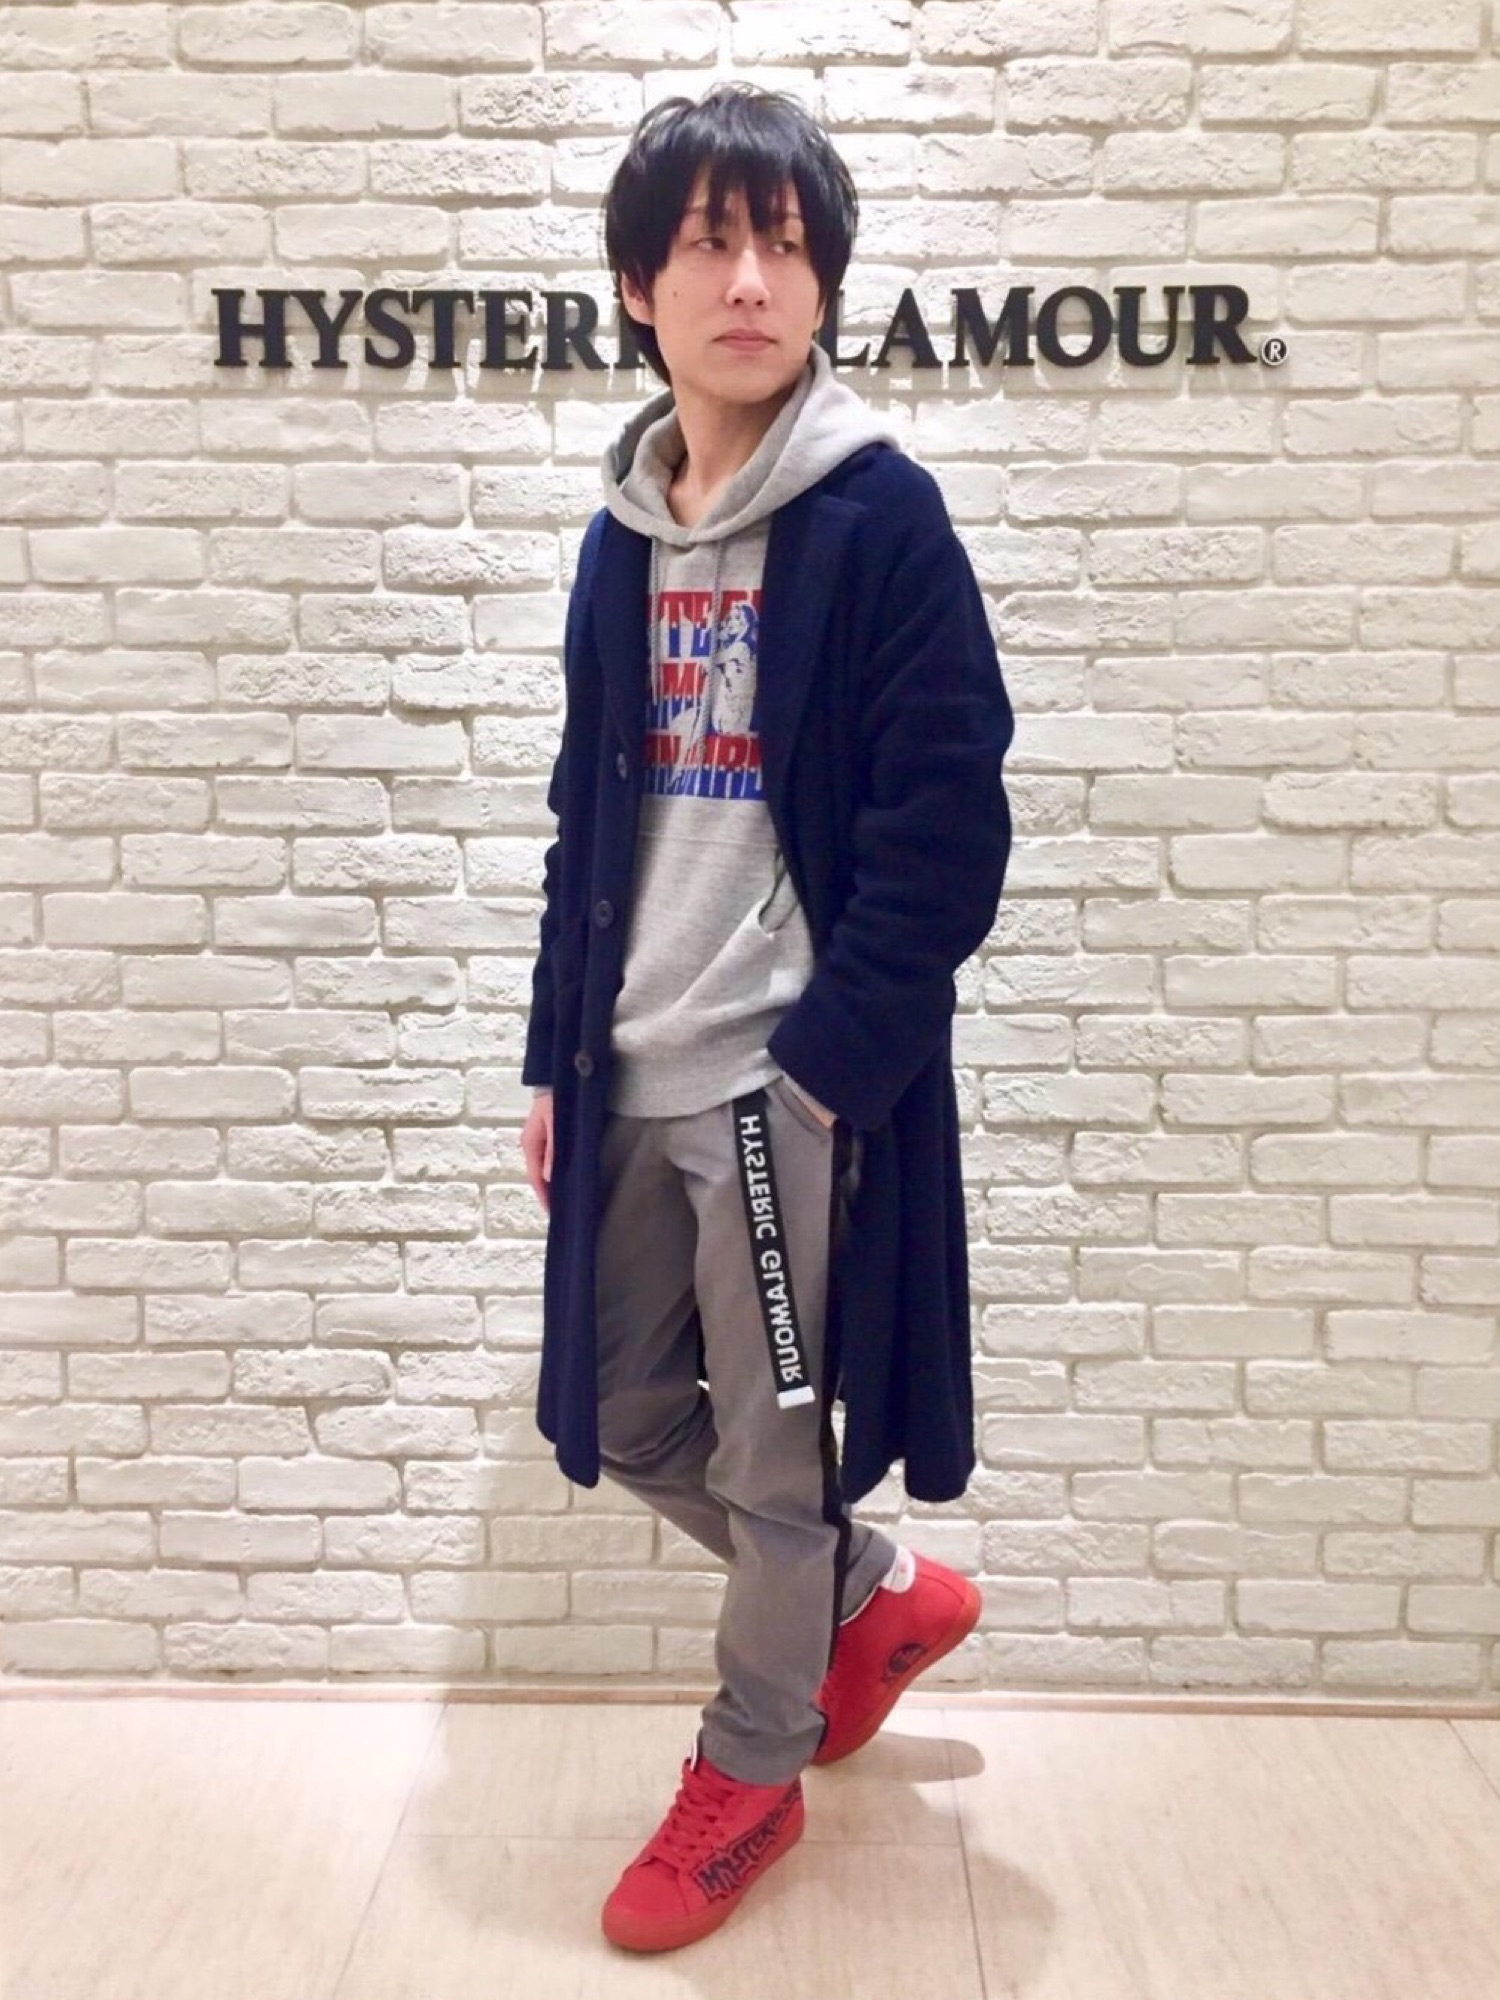 HYSTERIC GLAMOUR（ヒステリックグラマー）の「LOOK BACK GIRL pt 